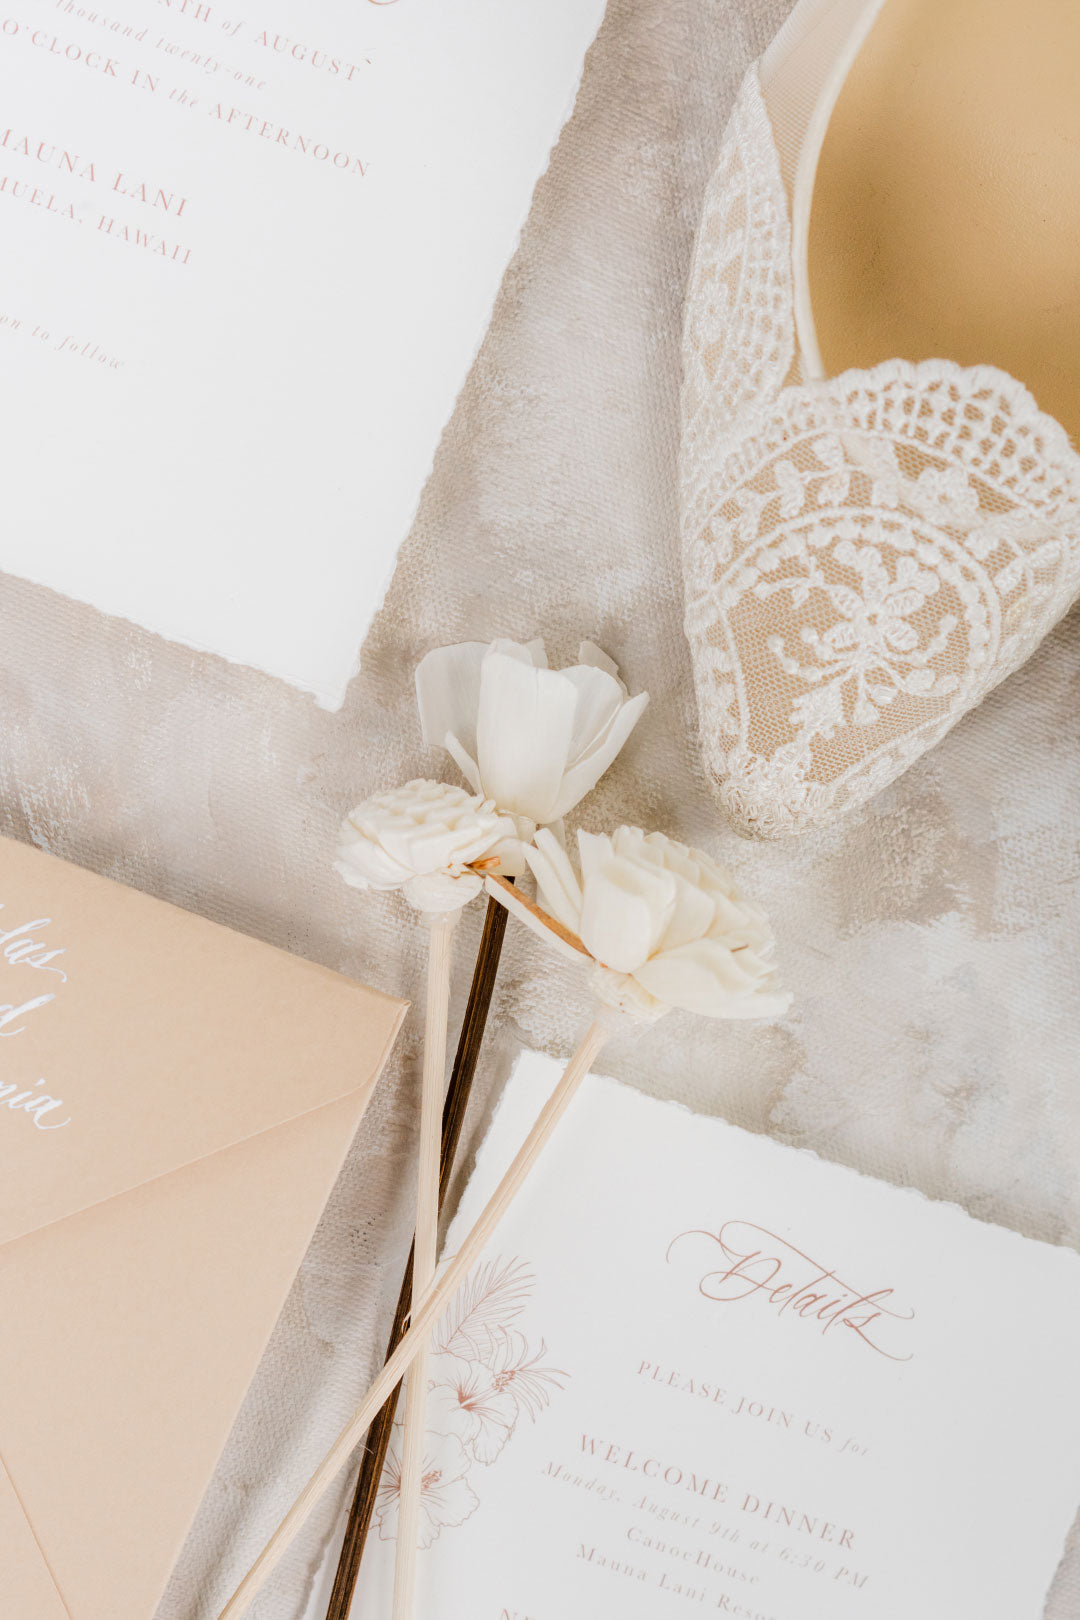 Wedding Stationery and Bridal Shoes